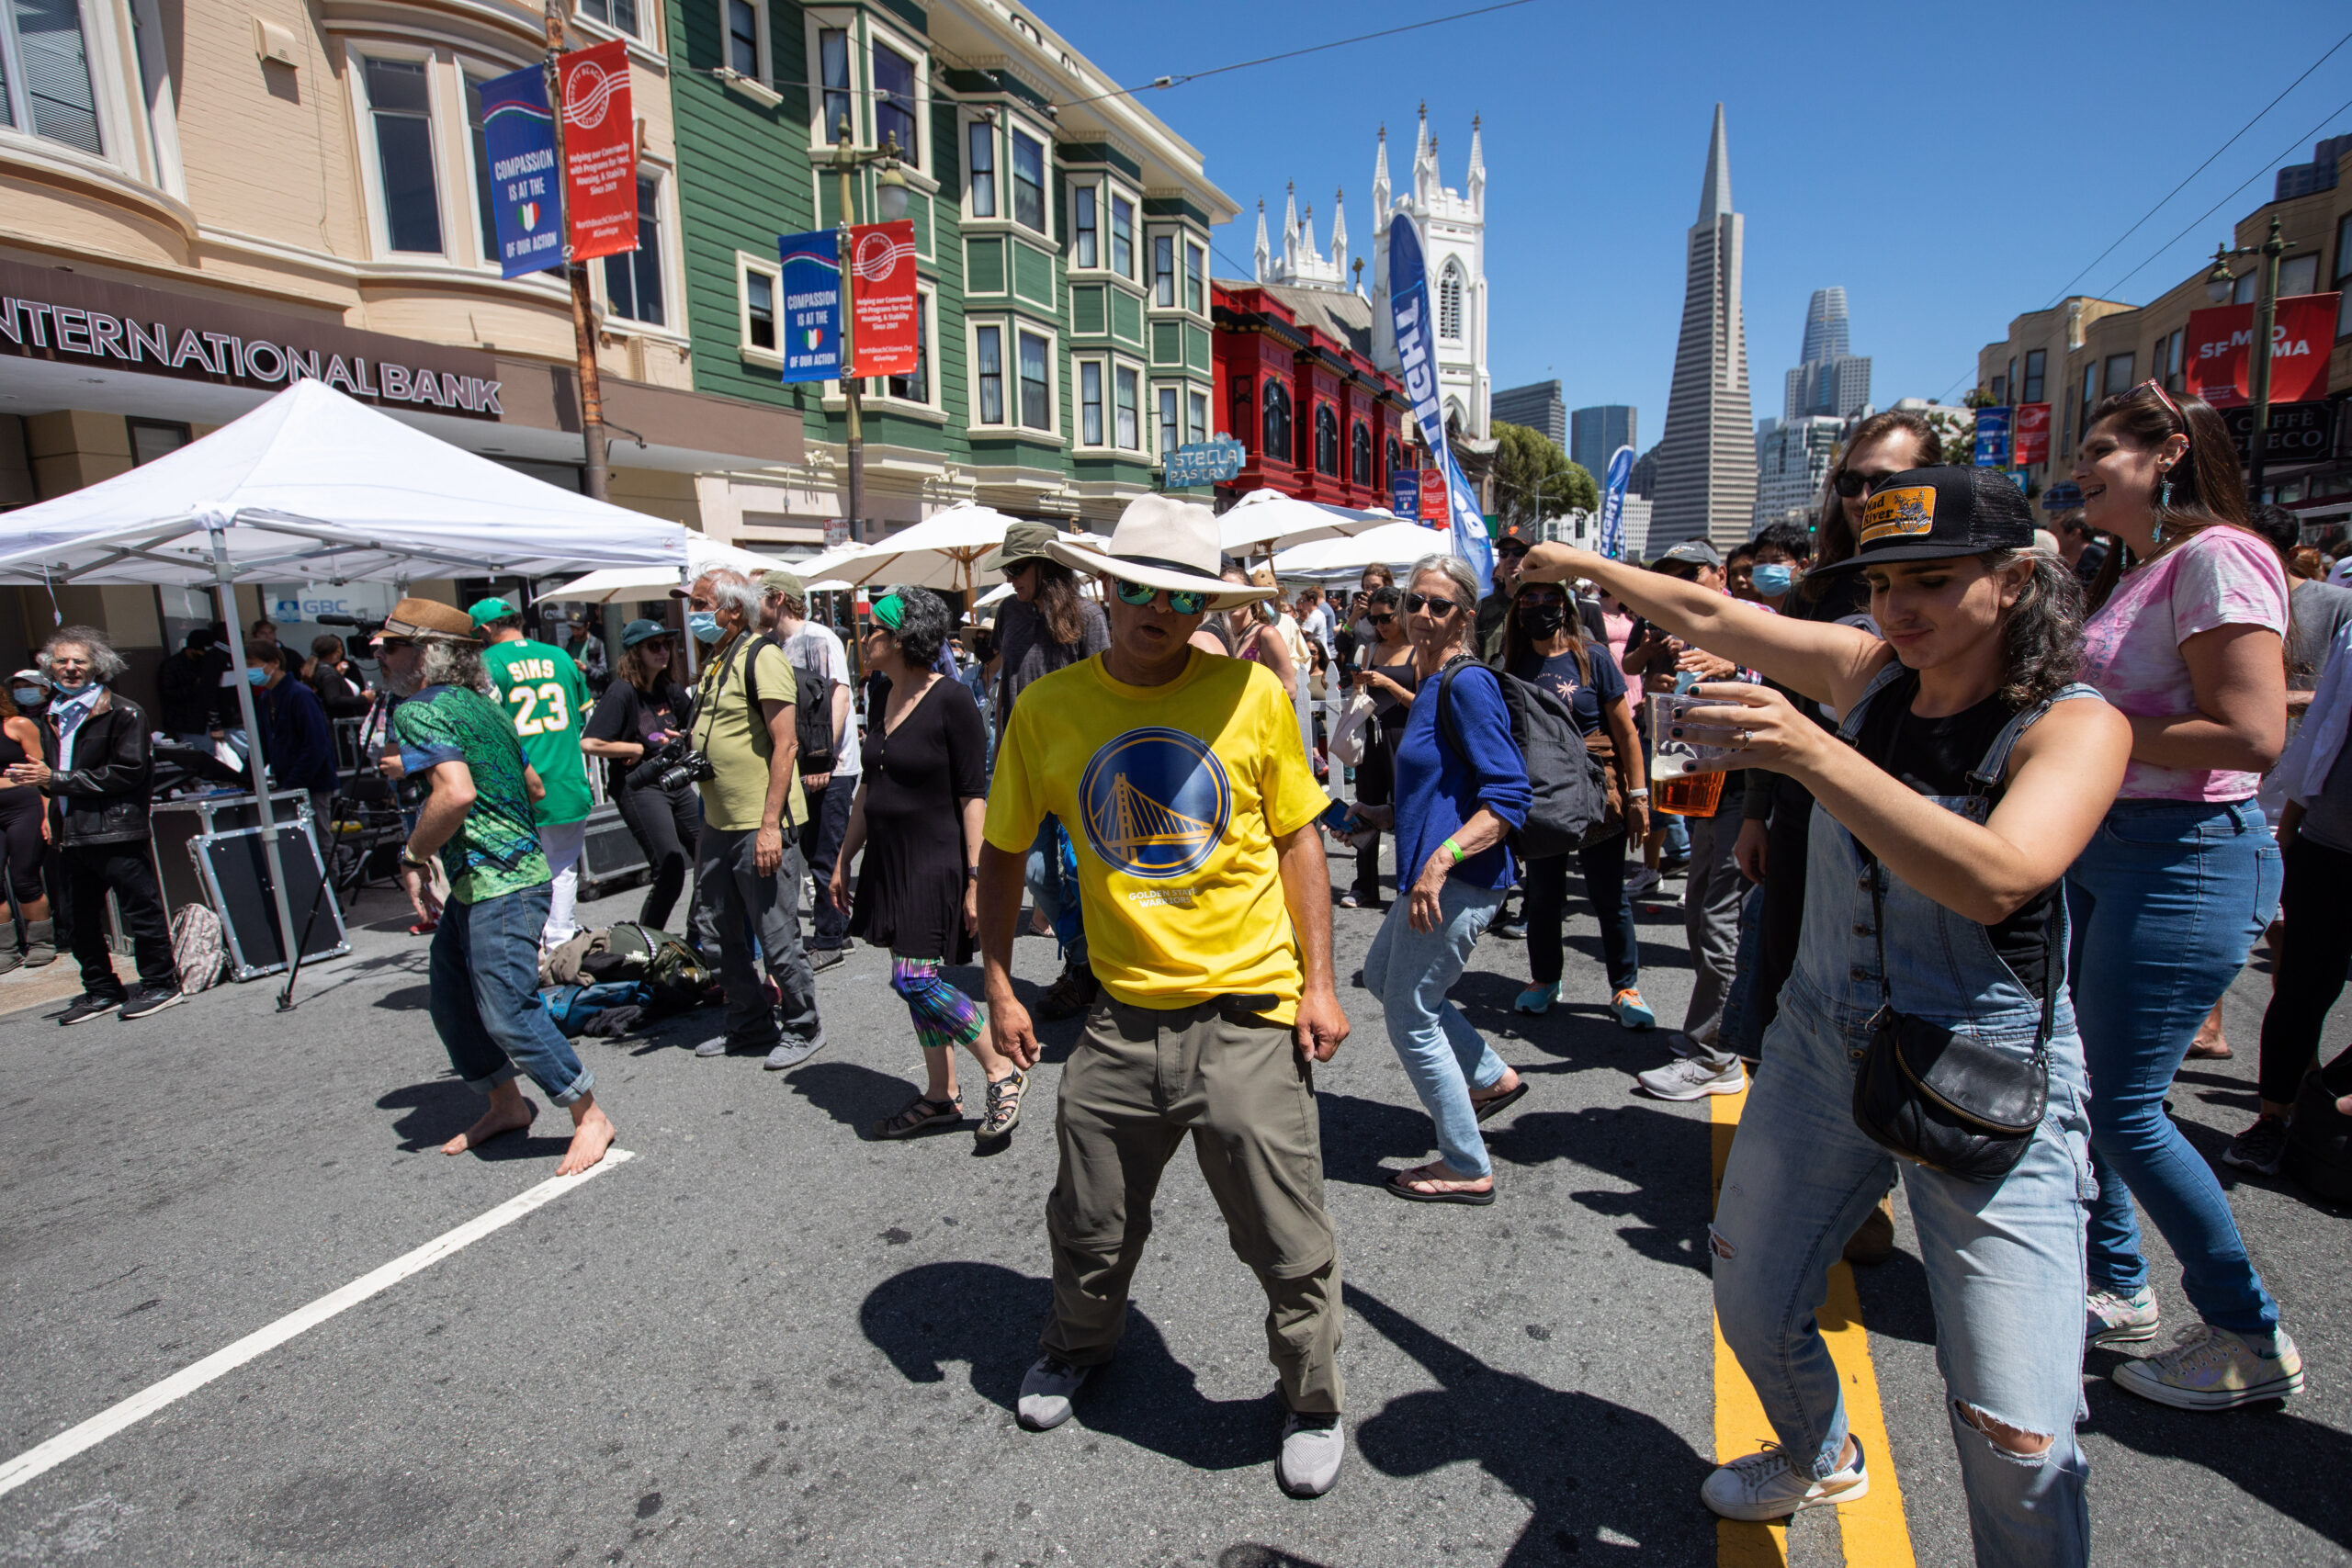 a man shows off his moves in the street during a festival, with the Transamerica pyramid behind him